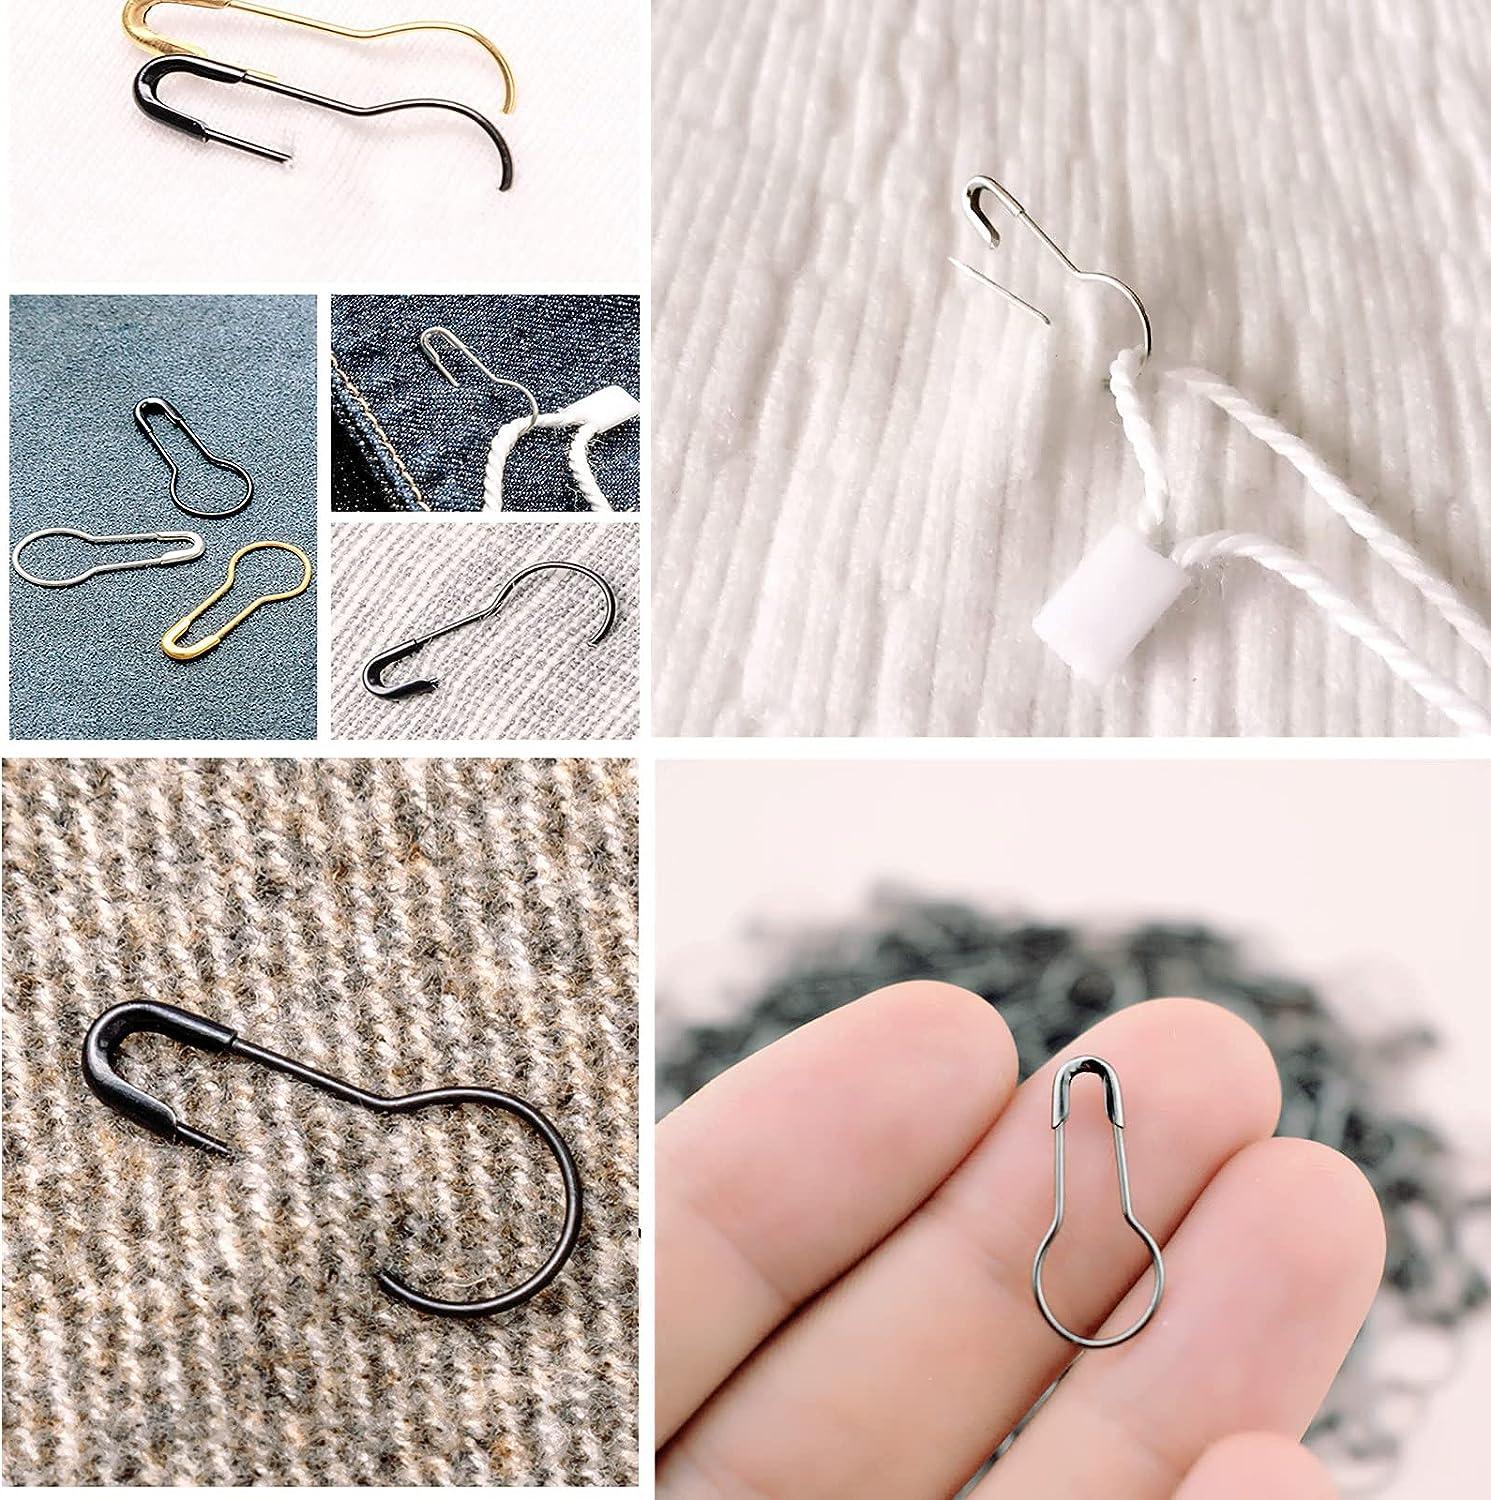 1000 pcs Small Safety Pins for Clothes Black Bulk Blub Pin for